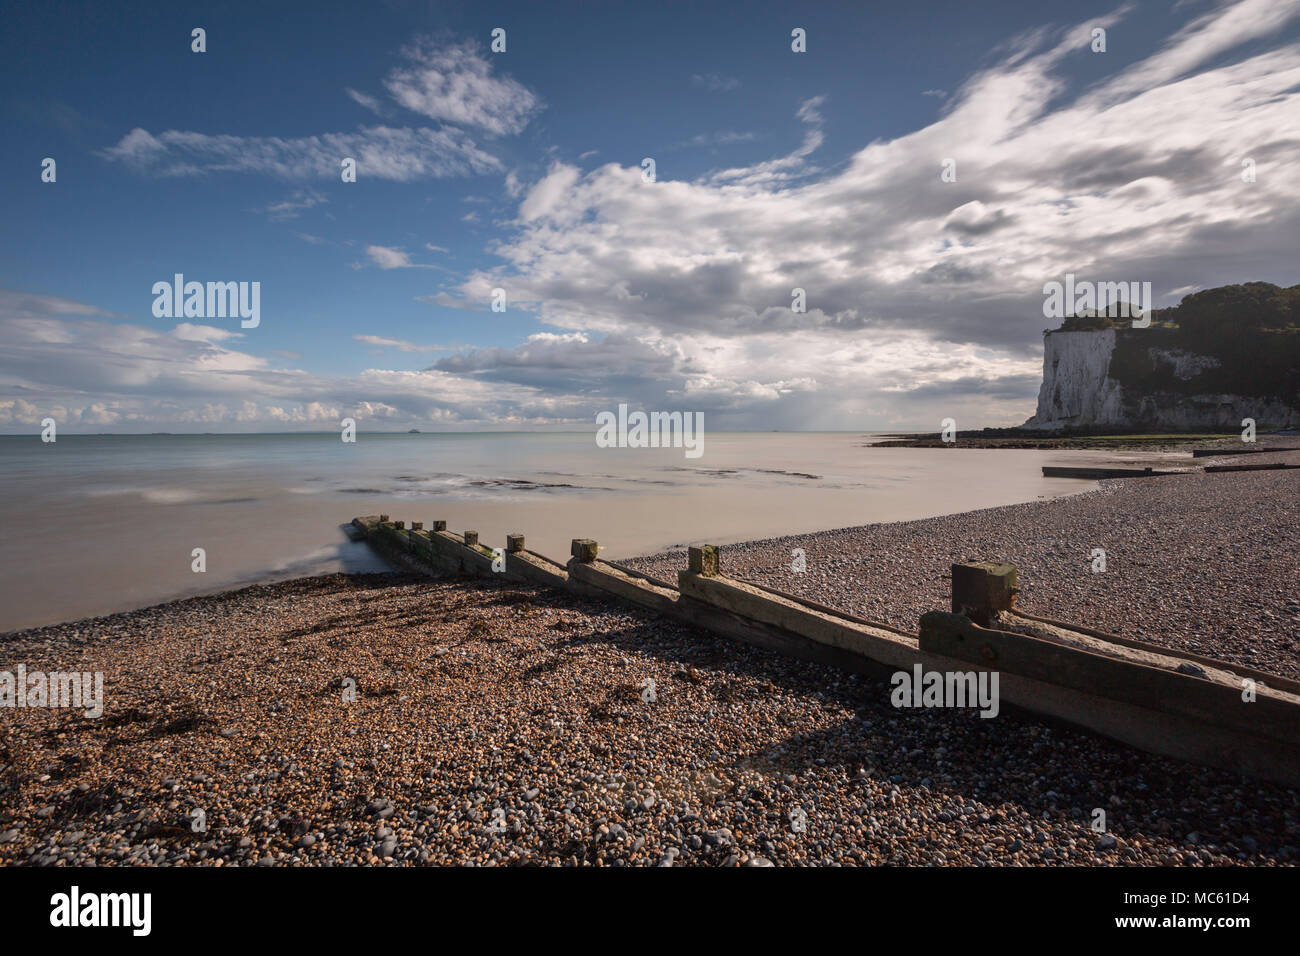 Long exposure at St Margaret's Bay on the English Channel, Dover, Kent, UK with the White Cliffs to the right and a wooden groyne in the foreground. Stock Photo